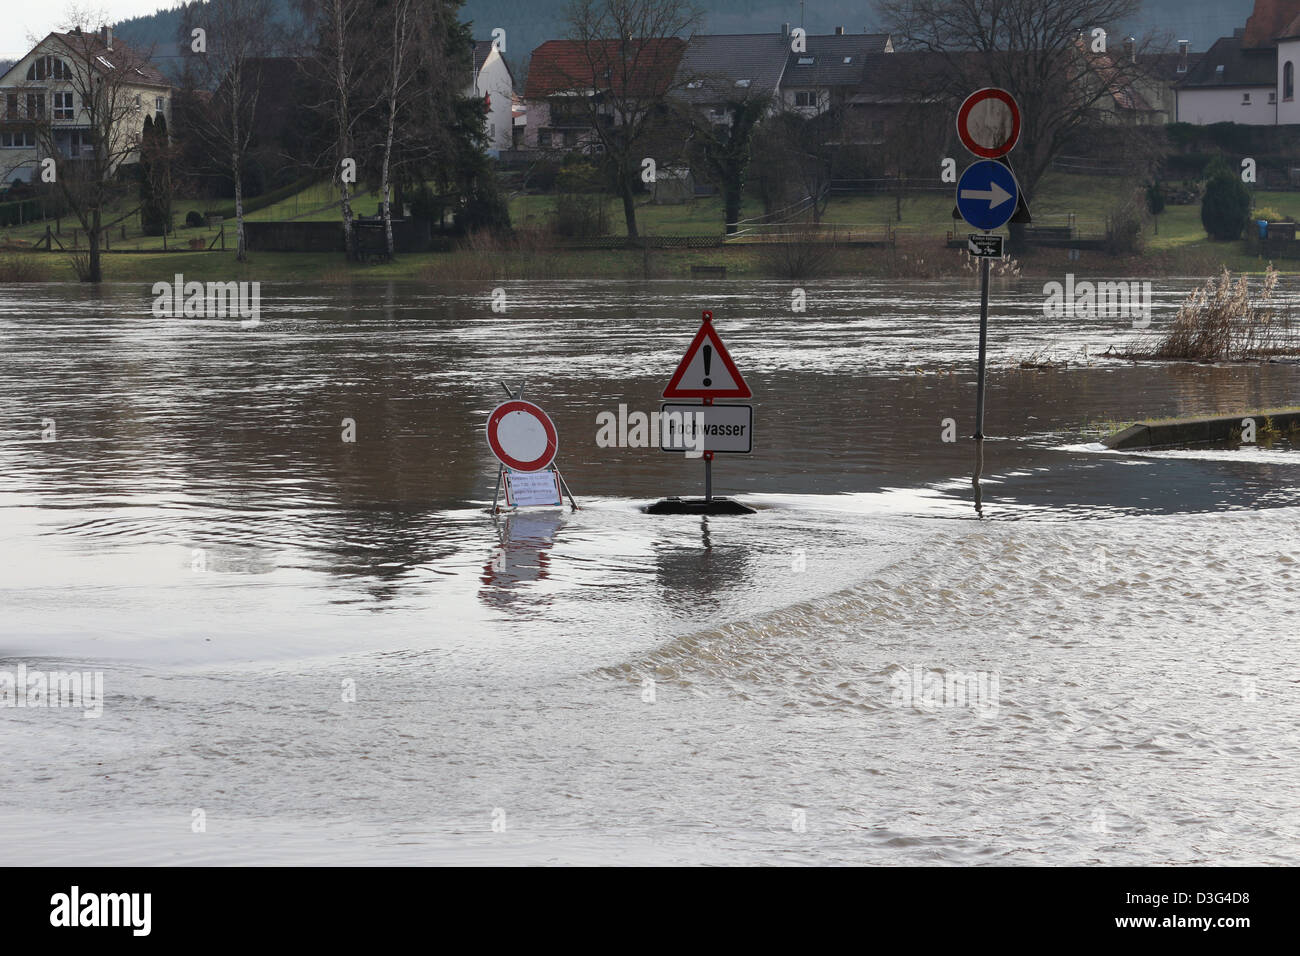 Stadtprozelten suffers regular flooding of main roads through the town. Flood warnings are erected to warn the population. Stock Photo